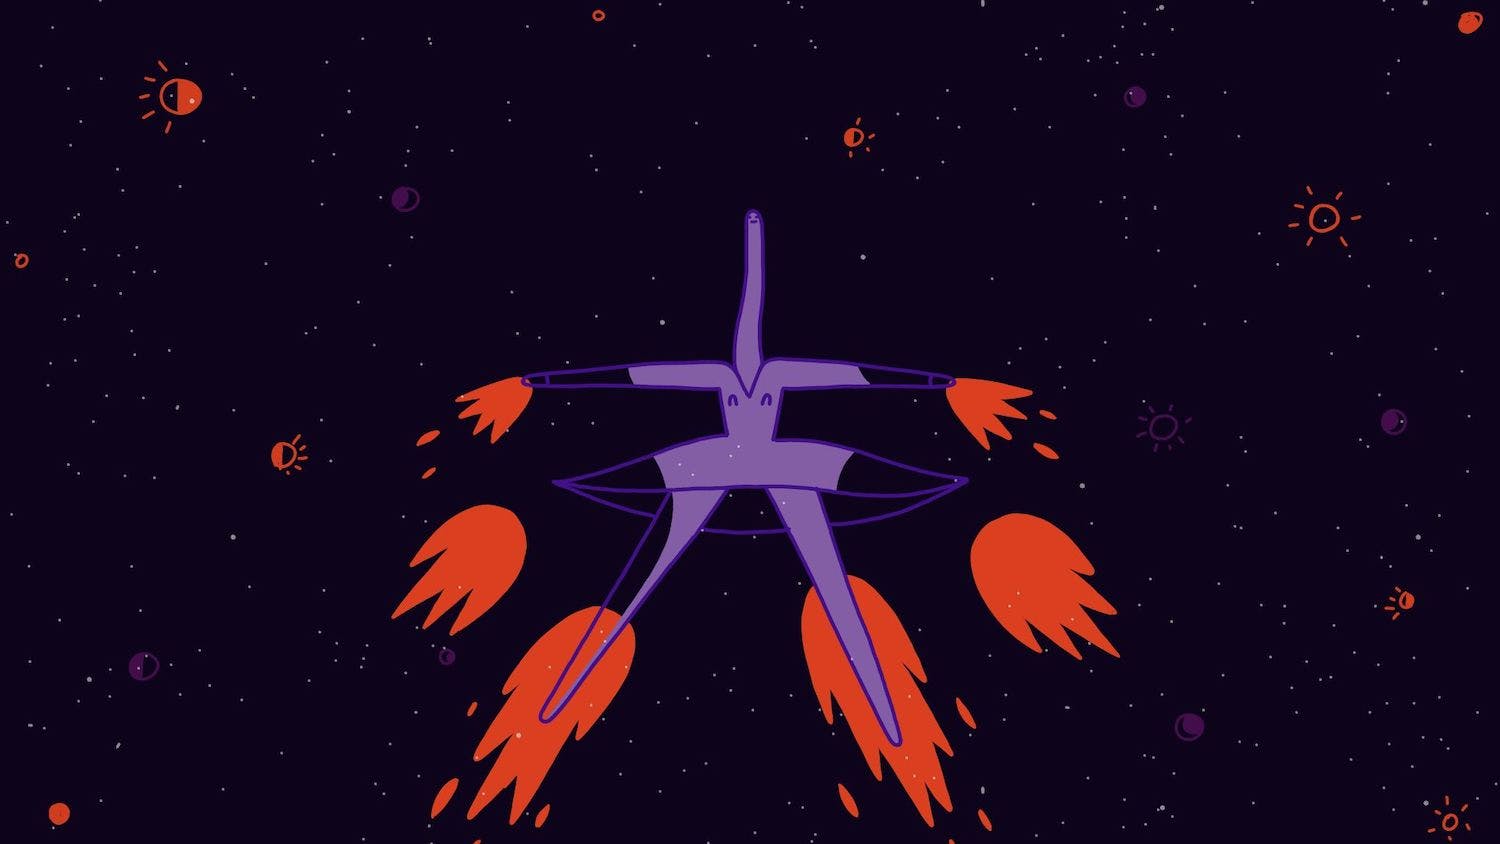 A purple character in a dress rockets through the stars, orange flames shooting from their hands and legs.